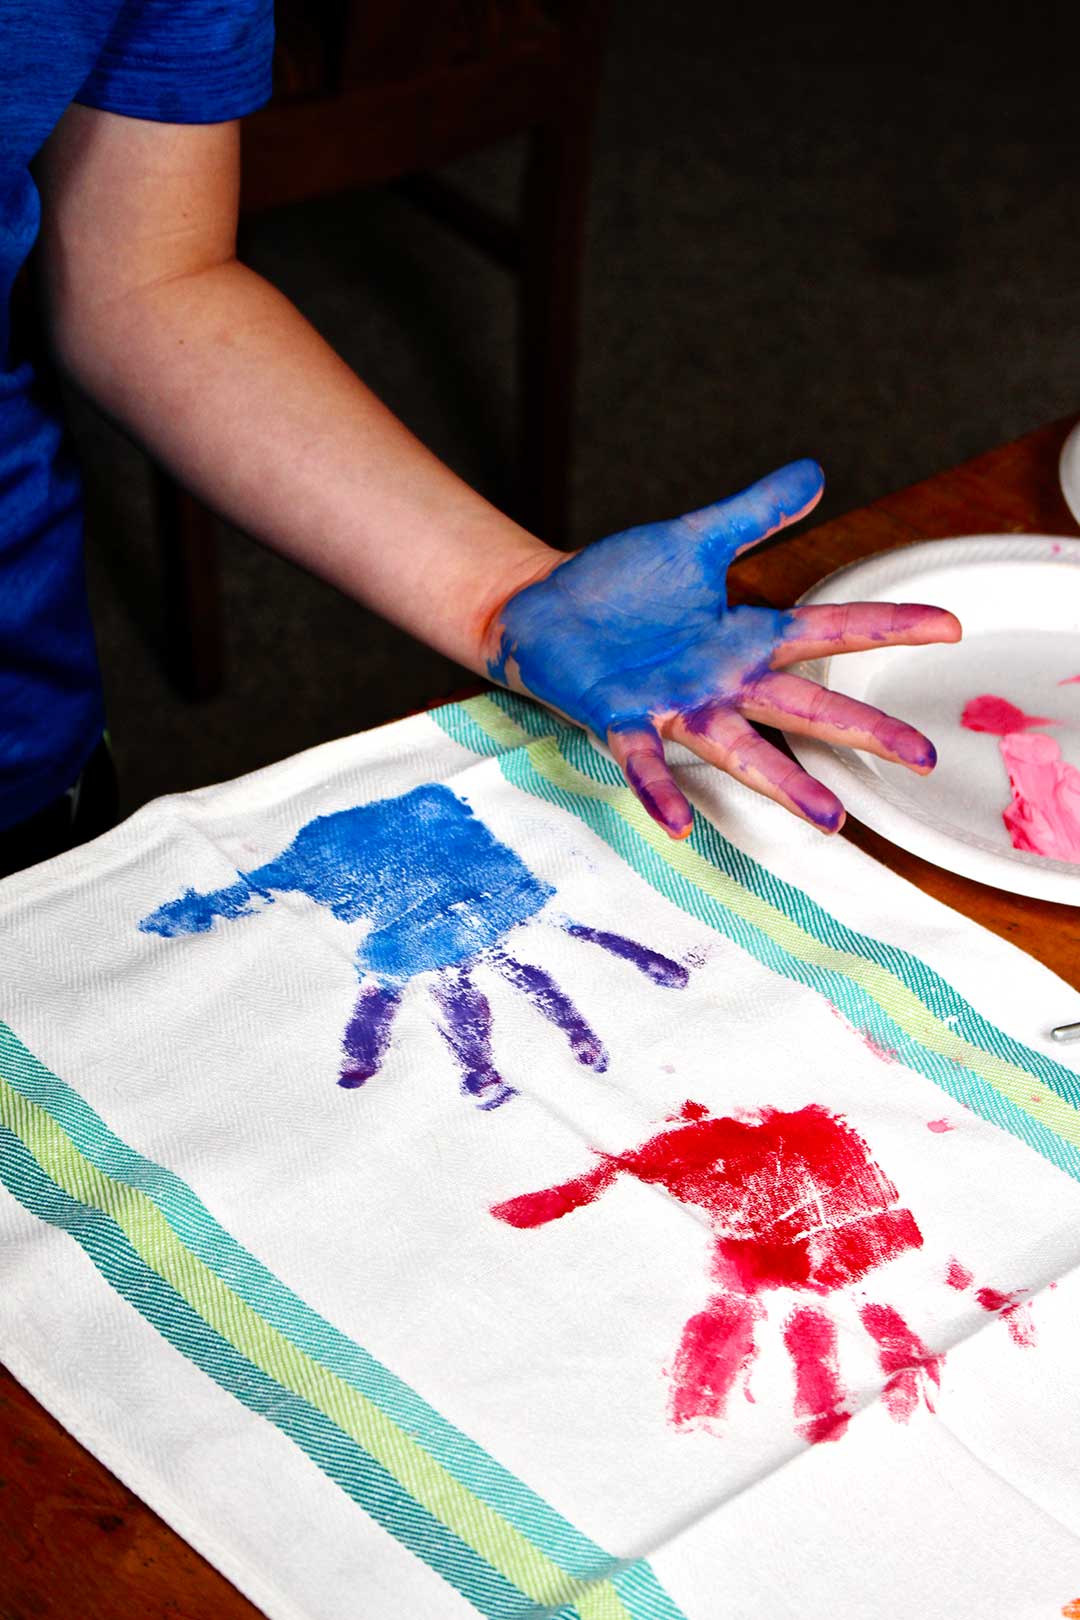 A child's hand painted blue and red and purple, leaving a handprint on a dish towel.